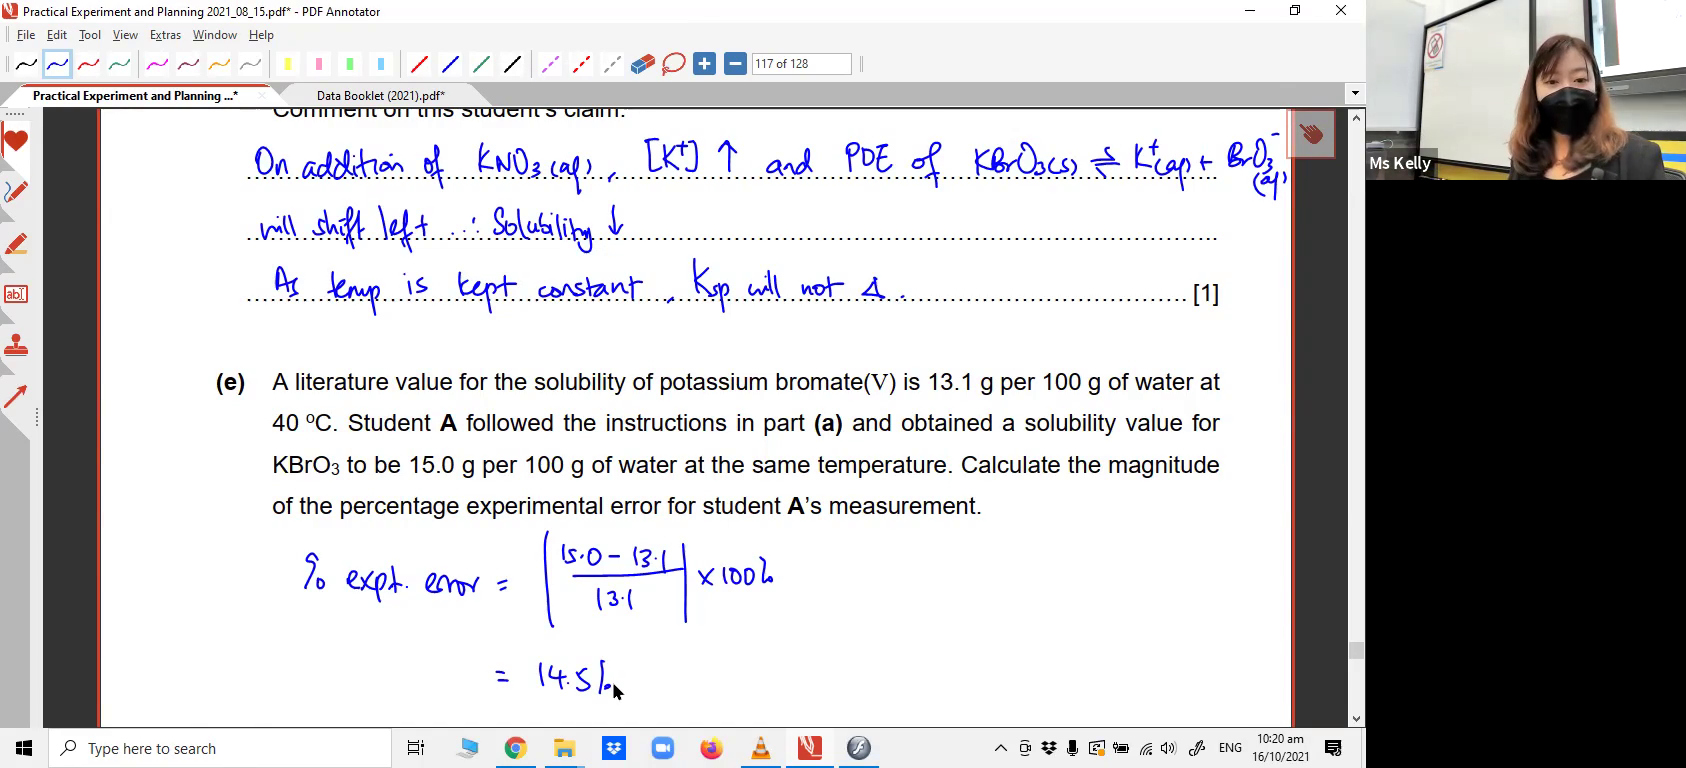 [SOLUBILITY EQM] Paper 4 Experiment and Planning Questions